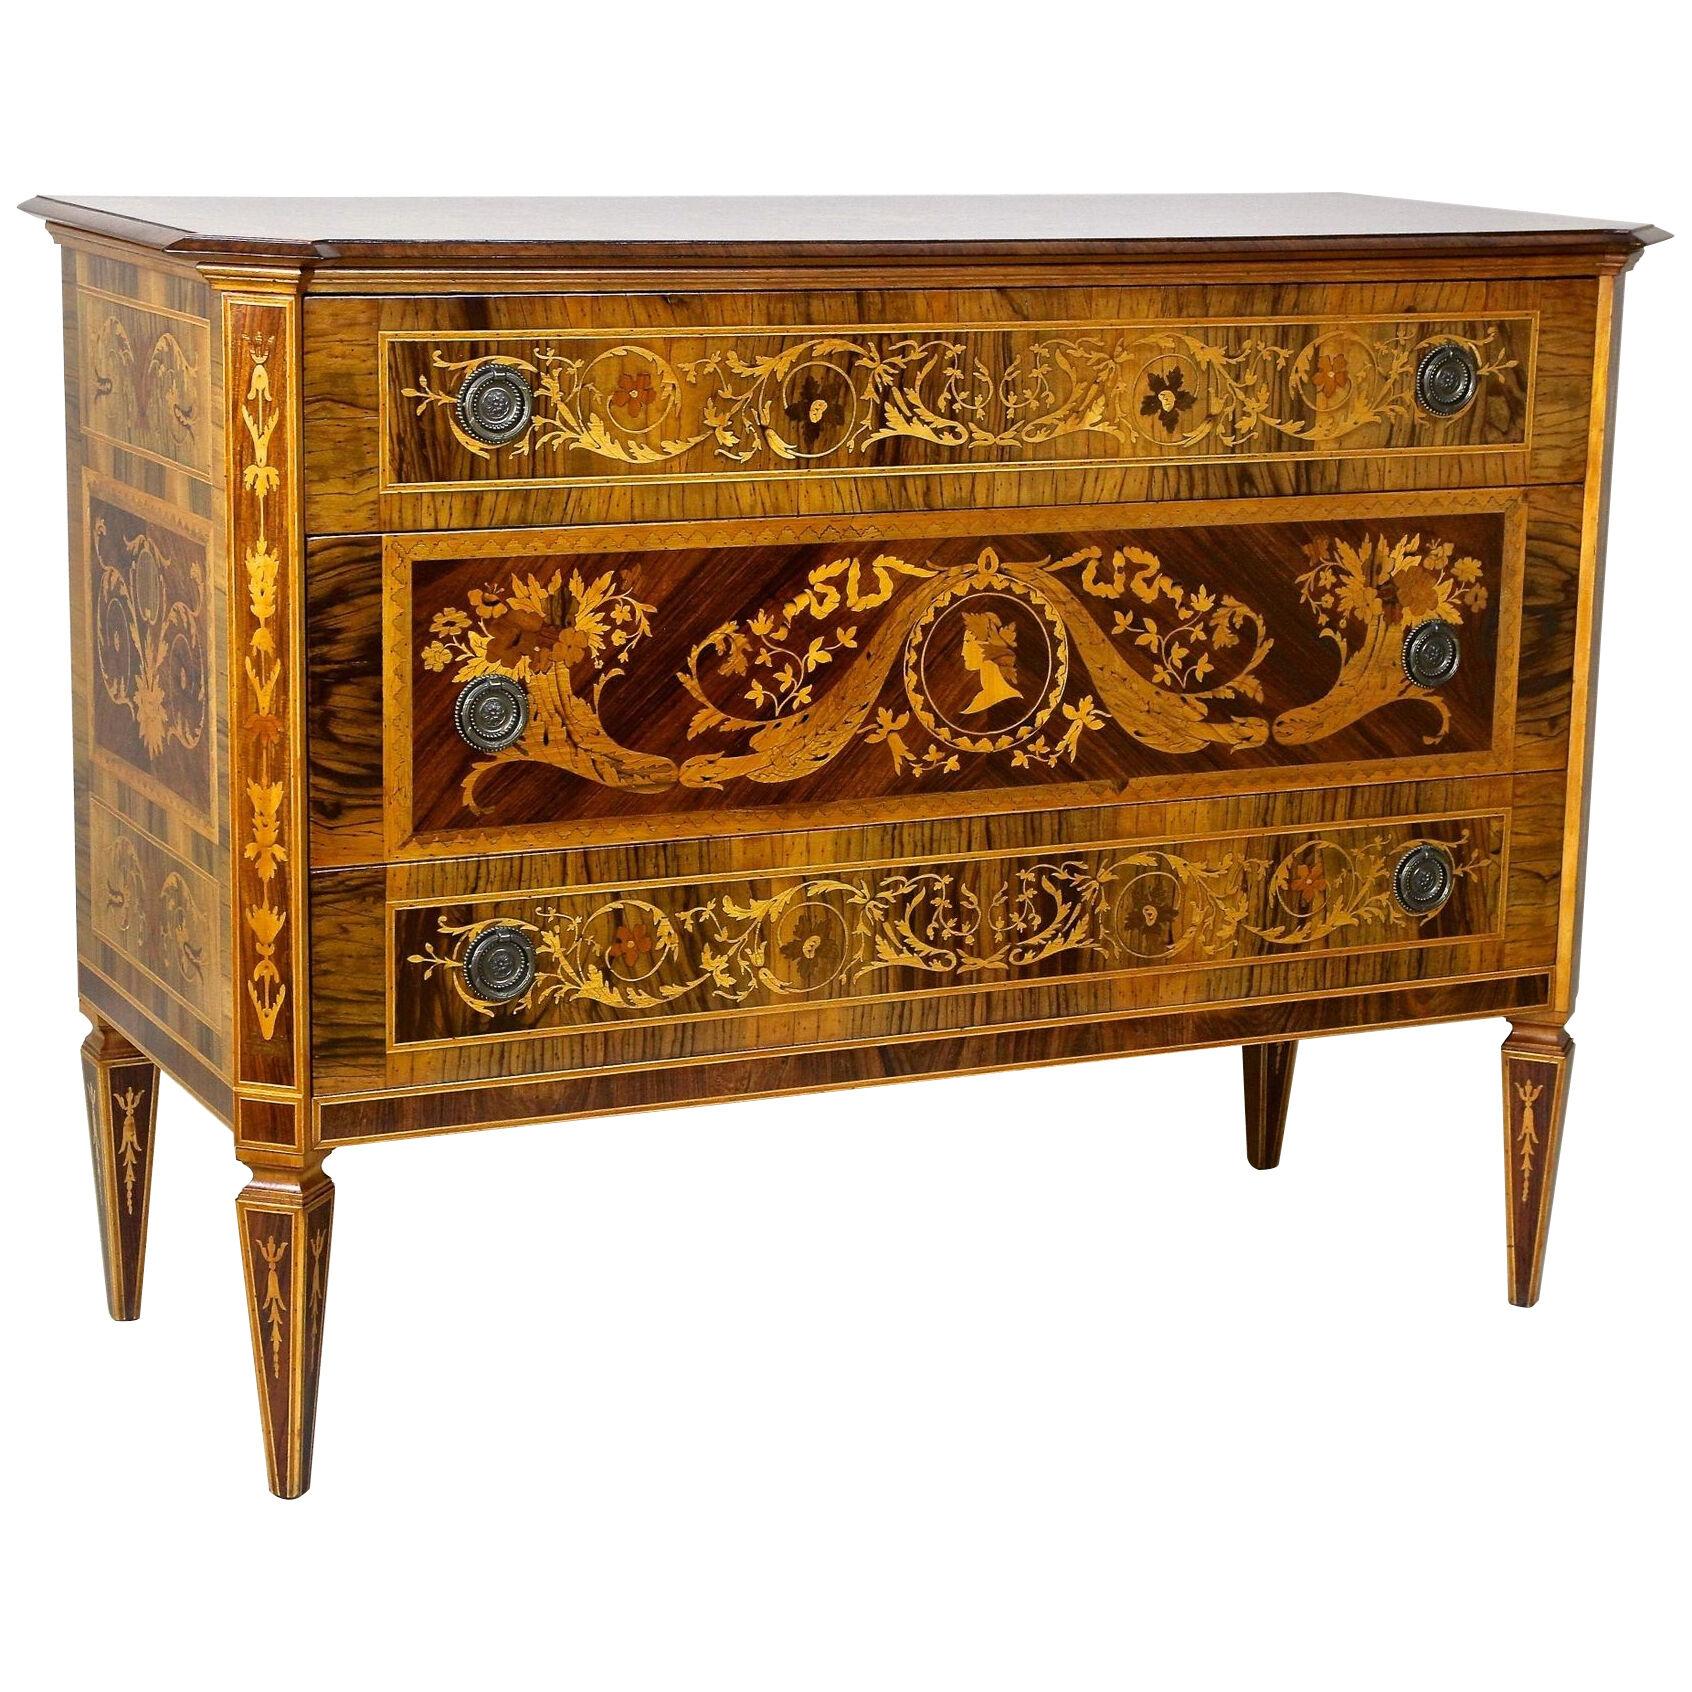 20th Century Italian Marquetry Commode After G. Maggiolini, Italy circa 1930